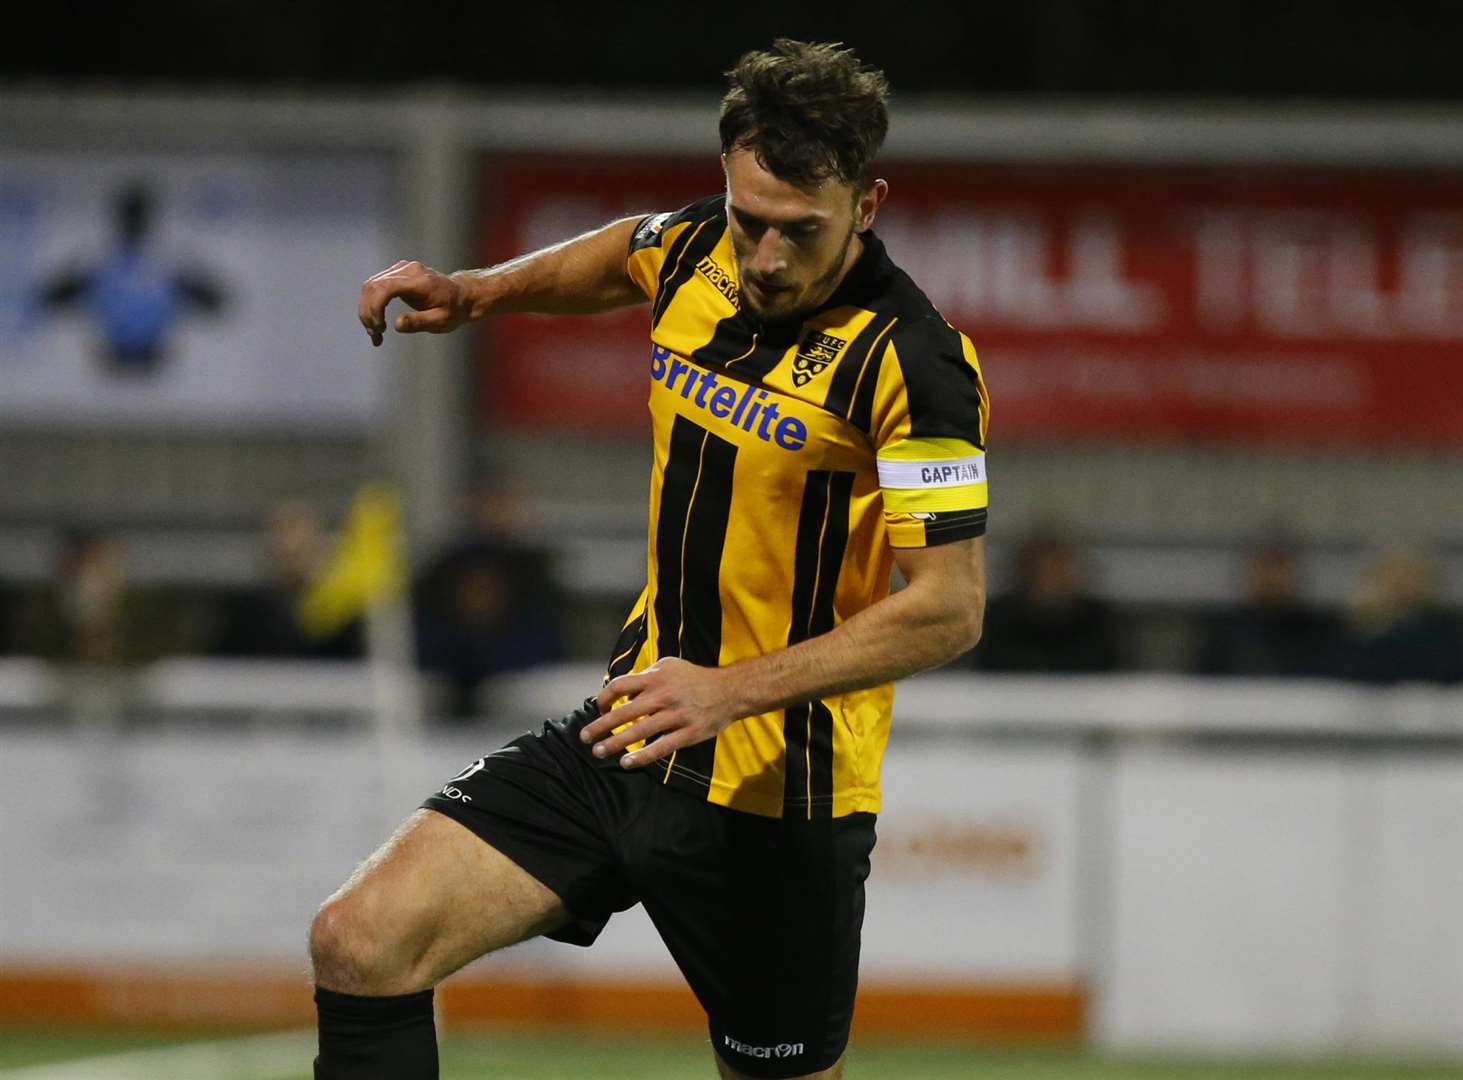 Will De Havilland says it's an honour to be Maidstone captain Picture: Andy Jones